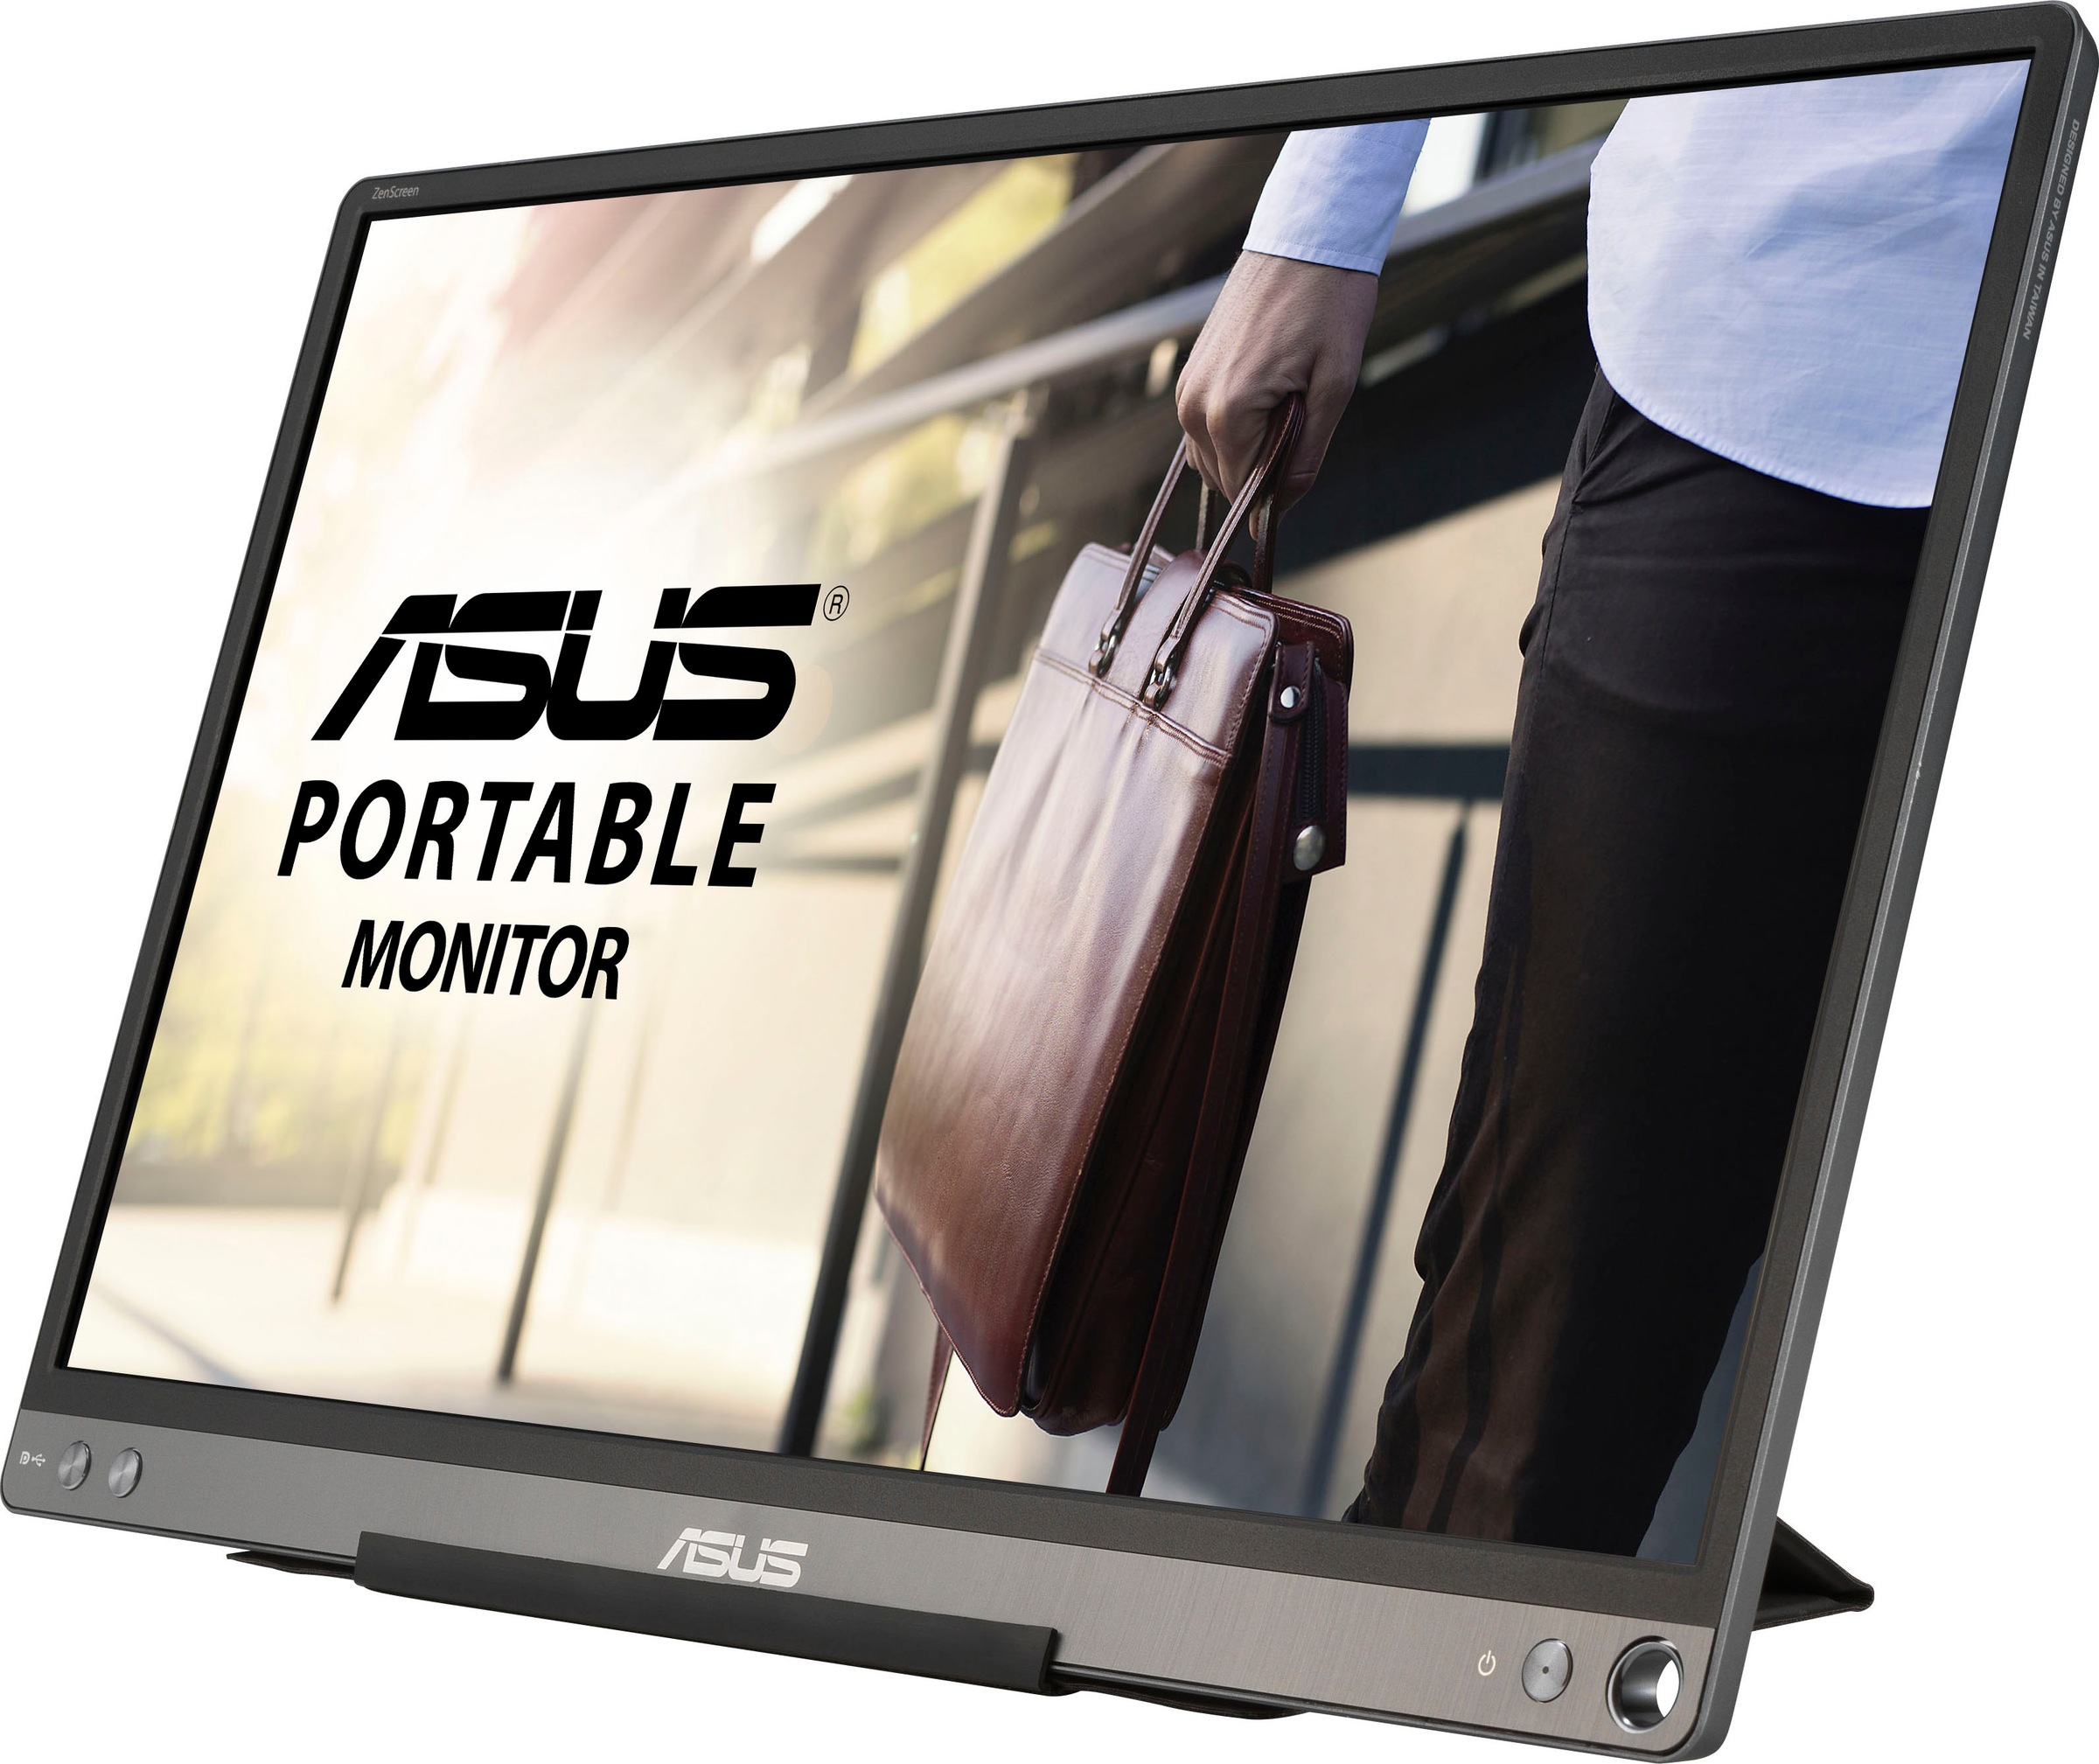 Asus Portabler Monitor »MB16ACE«, 40 cm/16 Zoll, 1920 x 1080 px, Full HD, 5 ms Reaktionszeit, 70 Hz